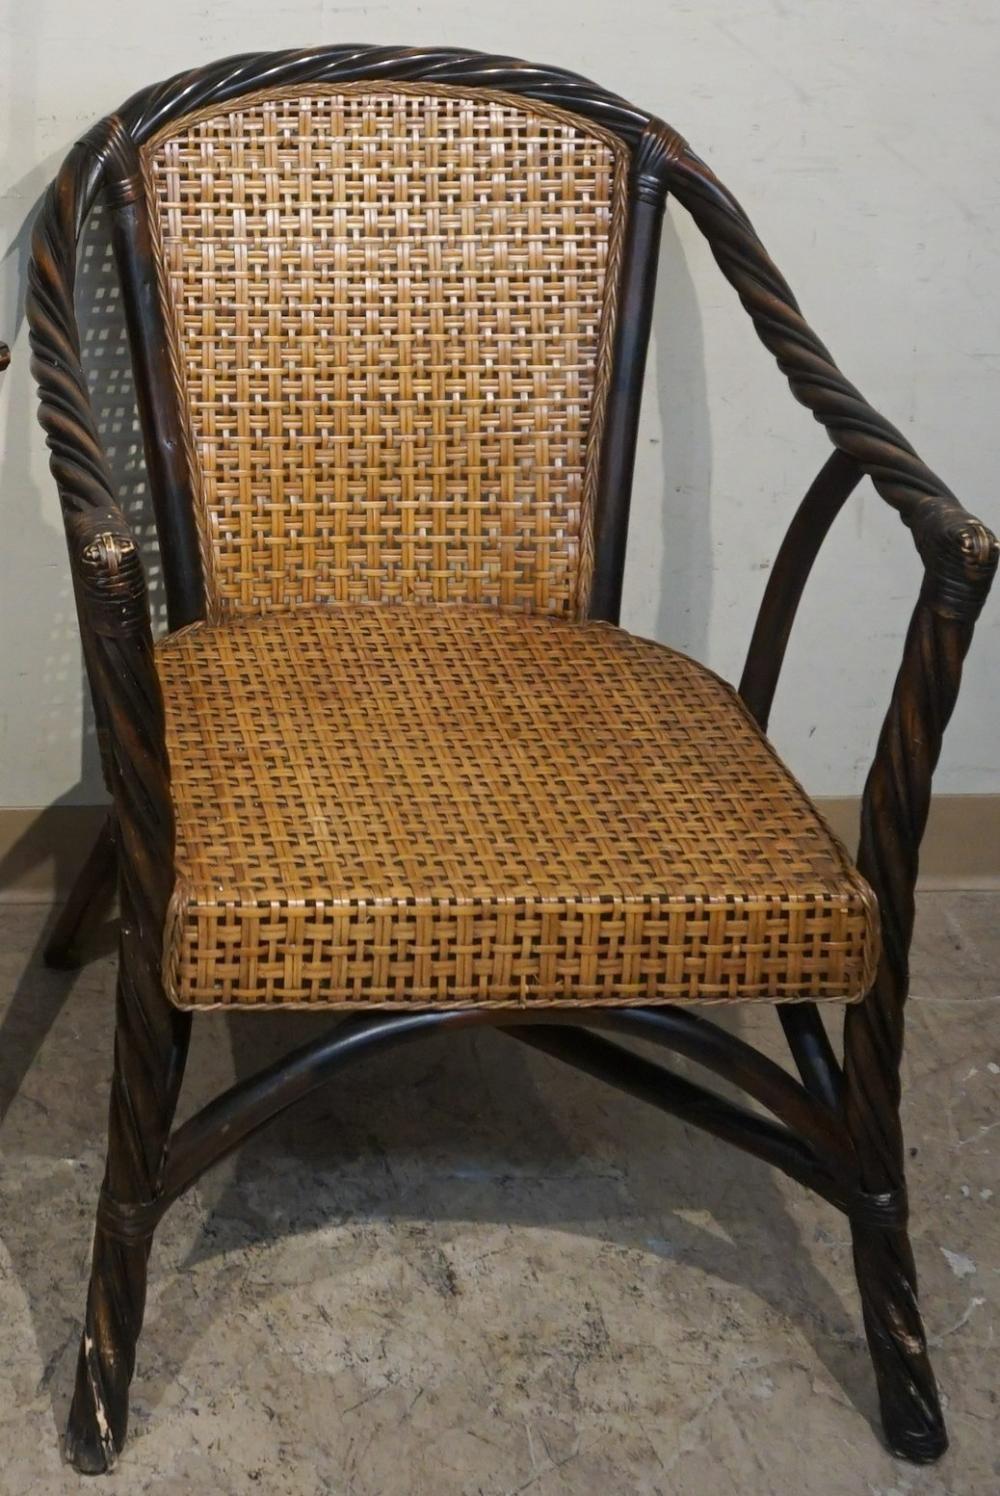 TURNED WOOD CANE SEAT AND BACK ARMCHAIRTurned